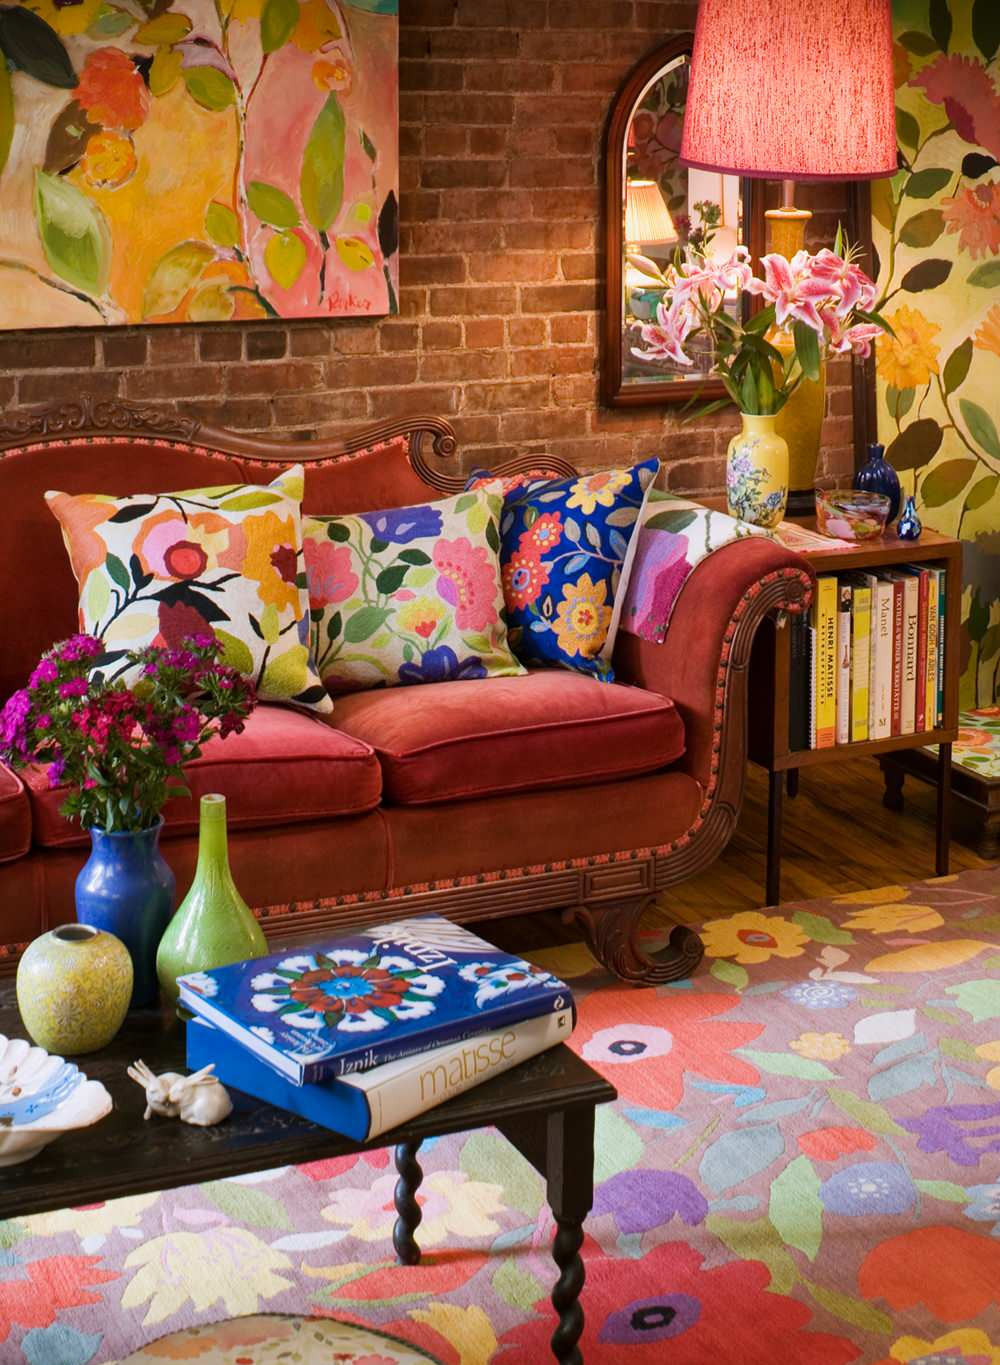 1-11-6 Paint Colors That Go With a Red Brick Wall